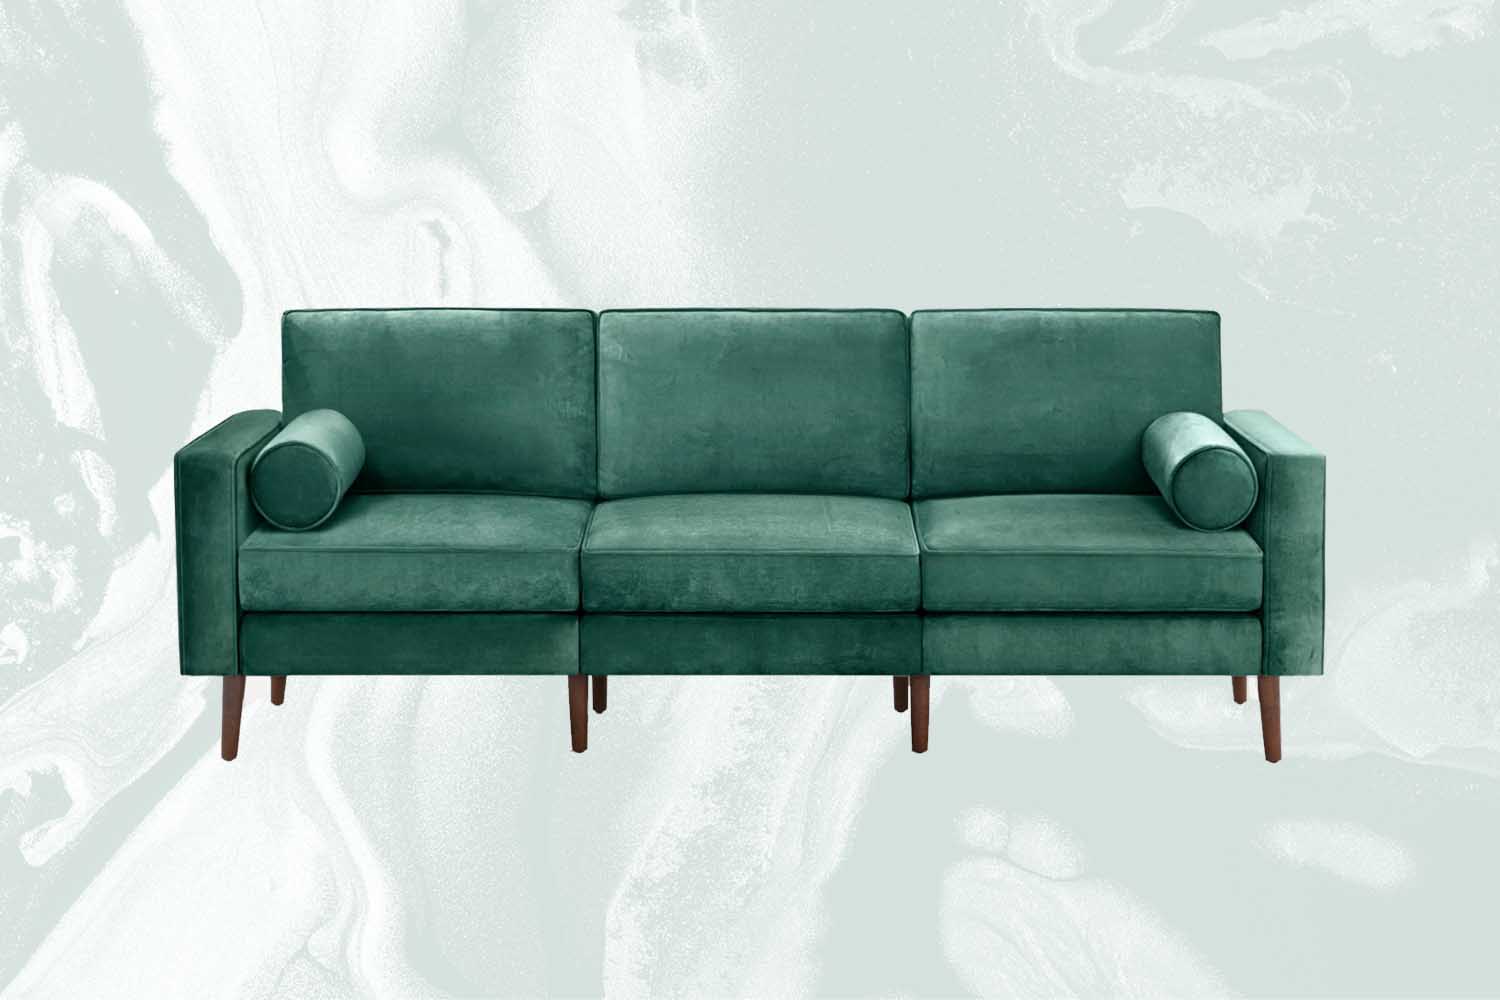 Burrow Just Launched an Incredibly Sexy Velvet Seating Collection